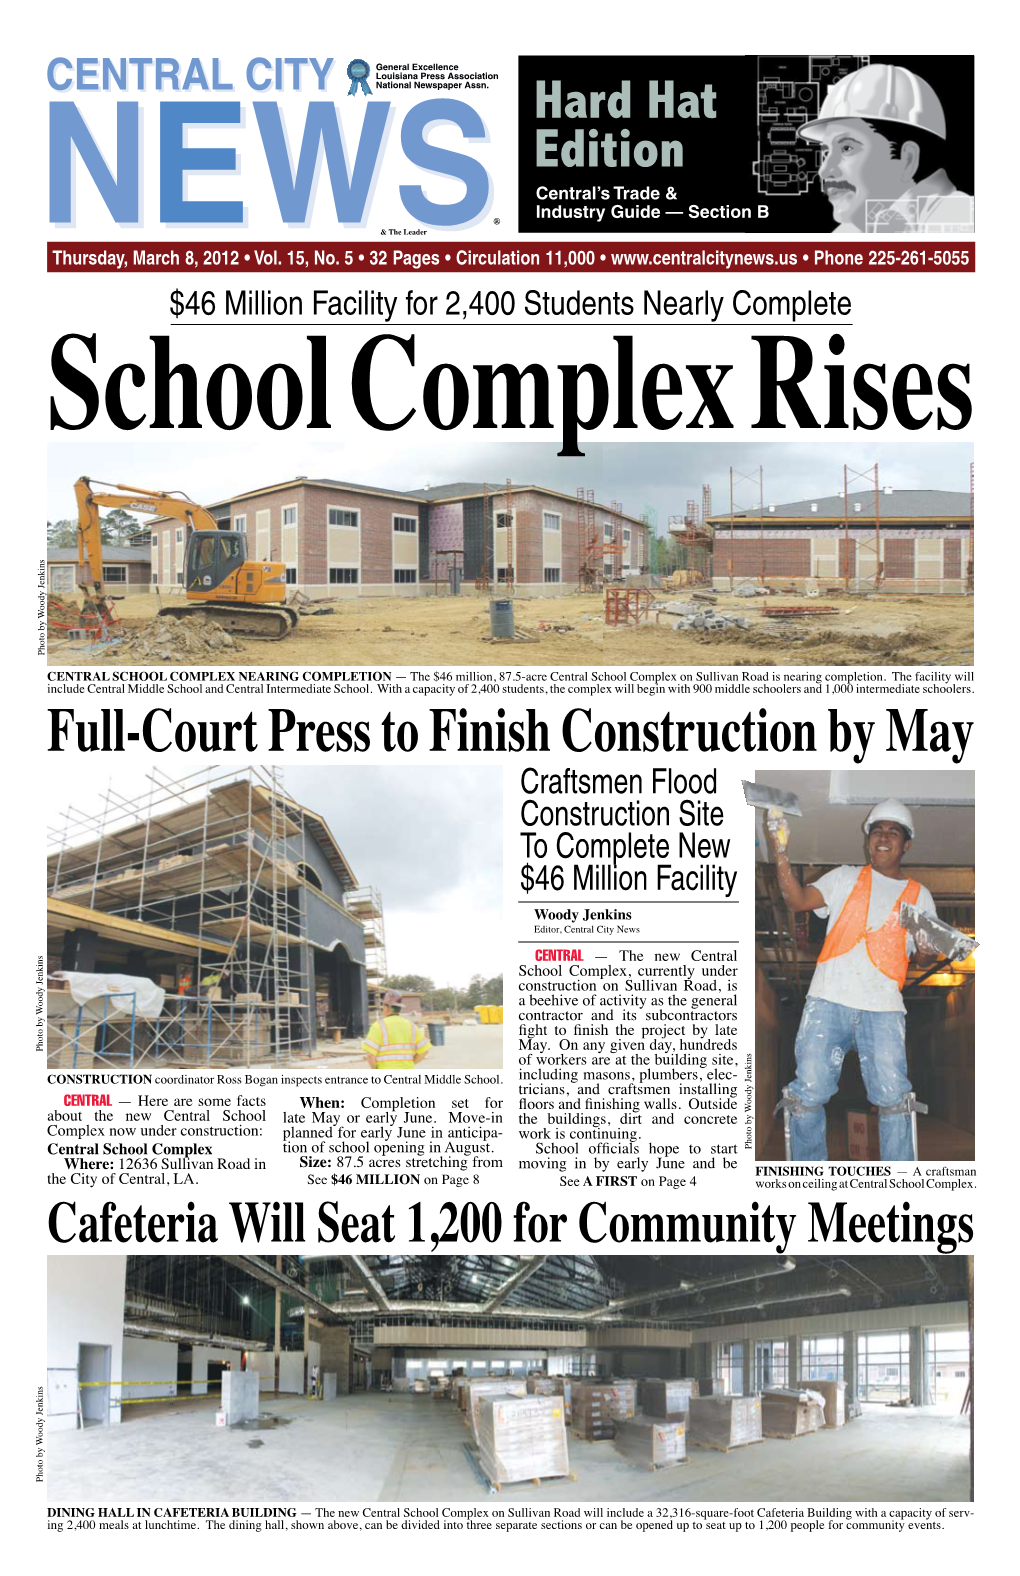 Full-Court Press to Finish Construction By